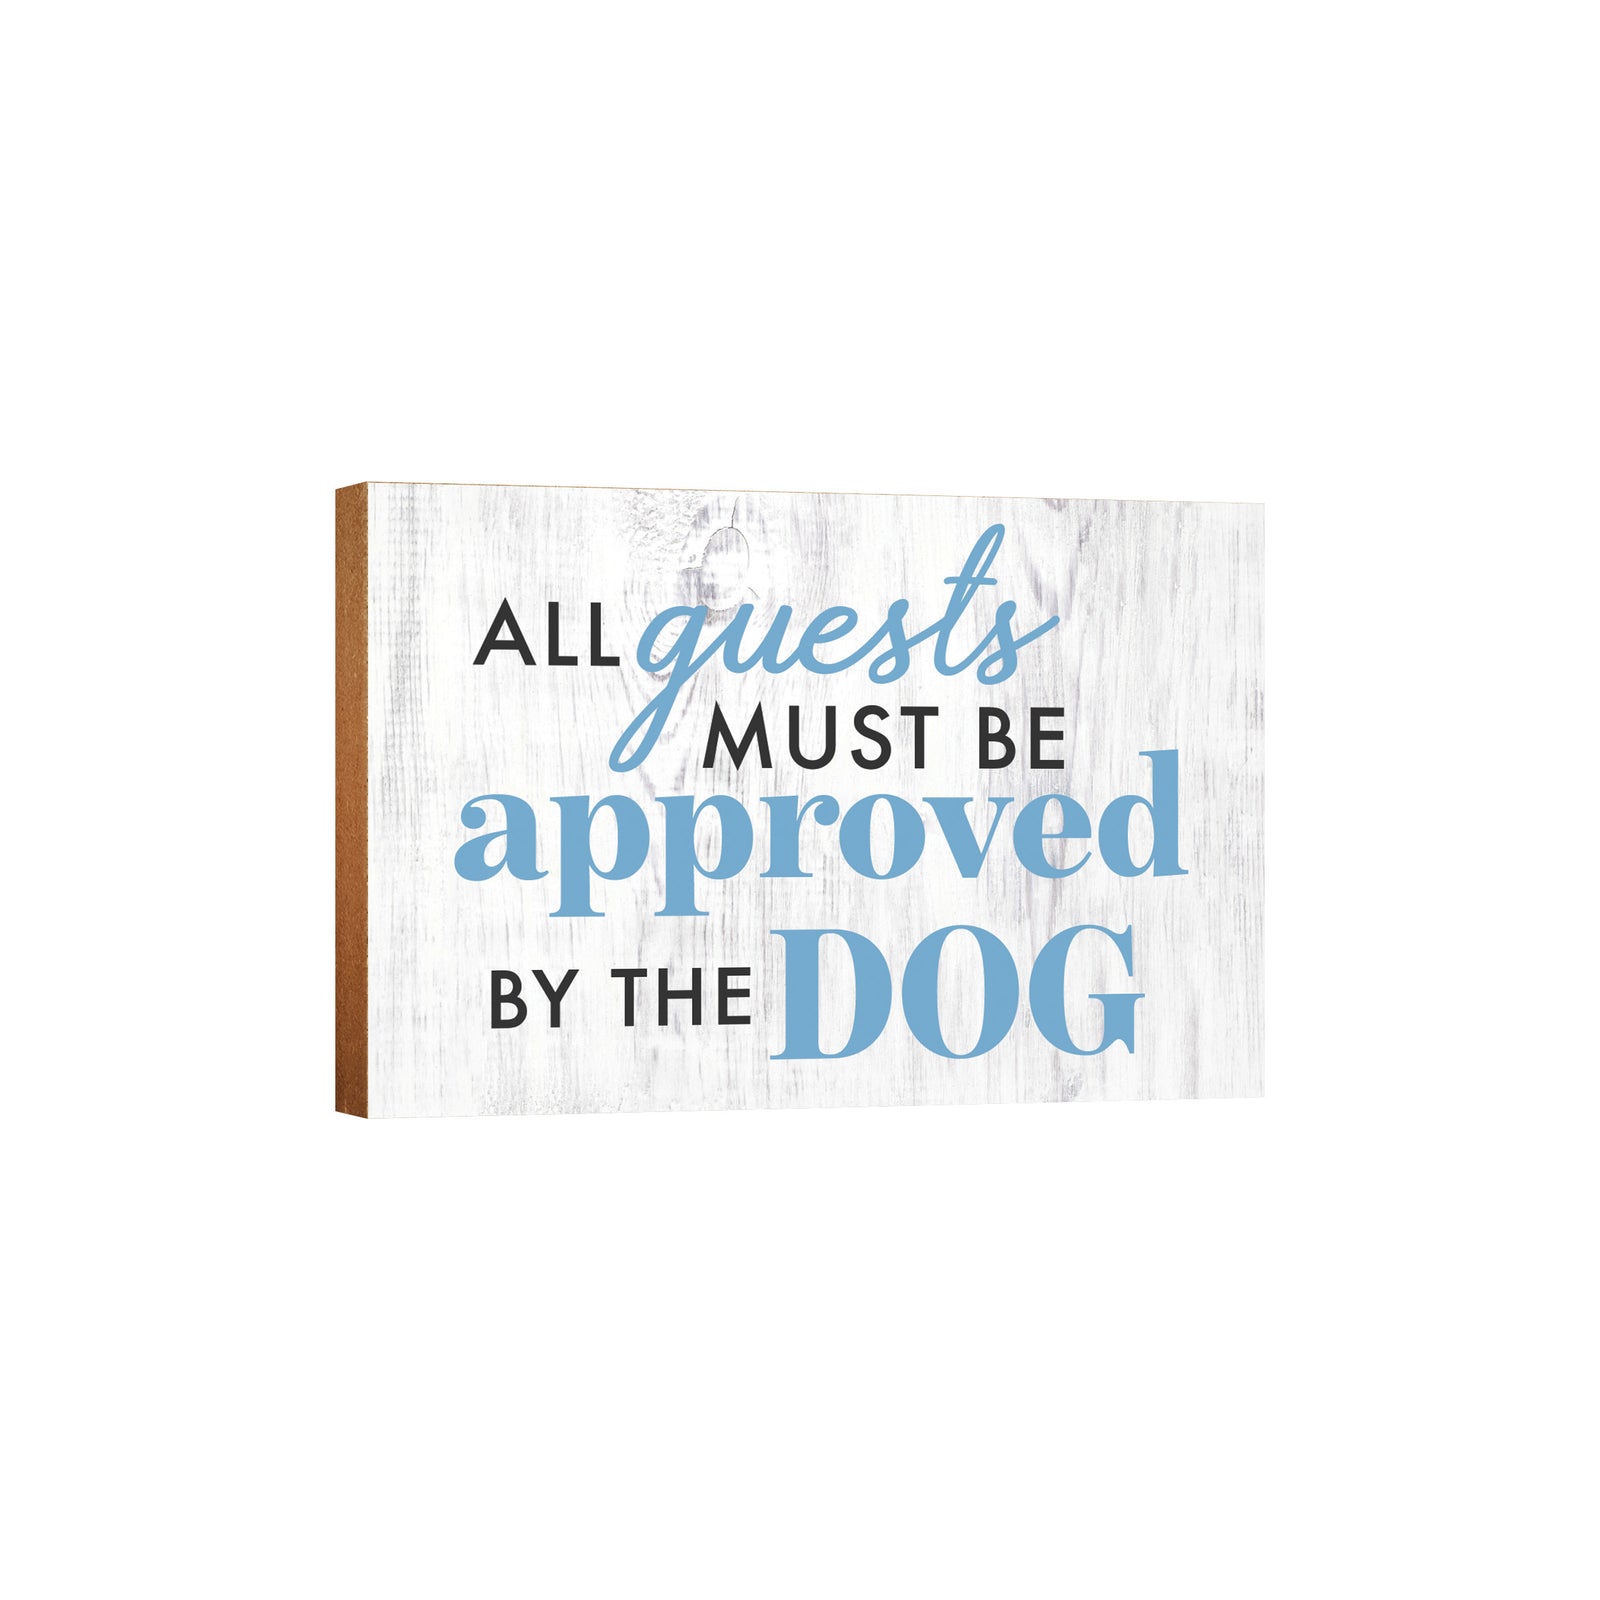 Wooden Shelf Decor and Tabletop Signs with Pet Verses - All Guests